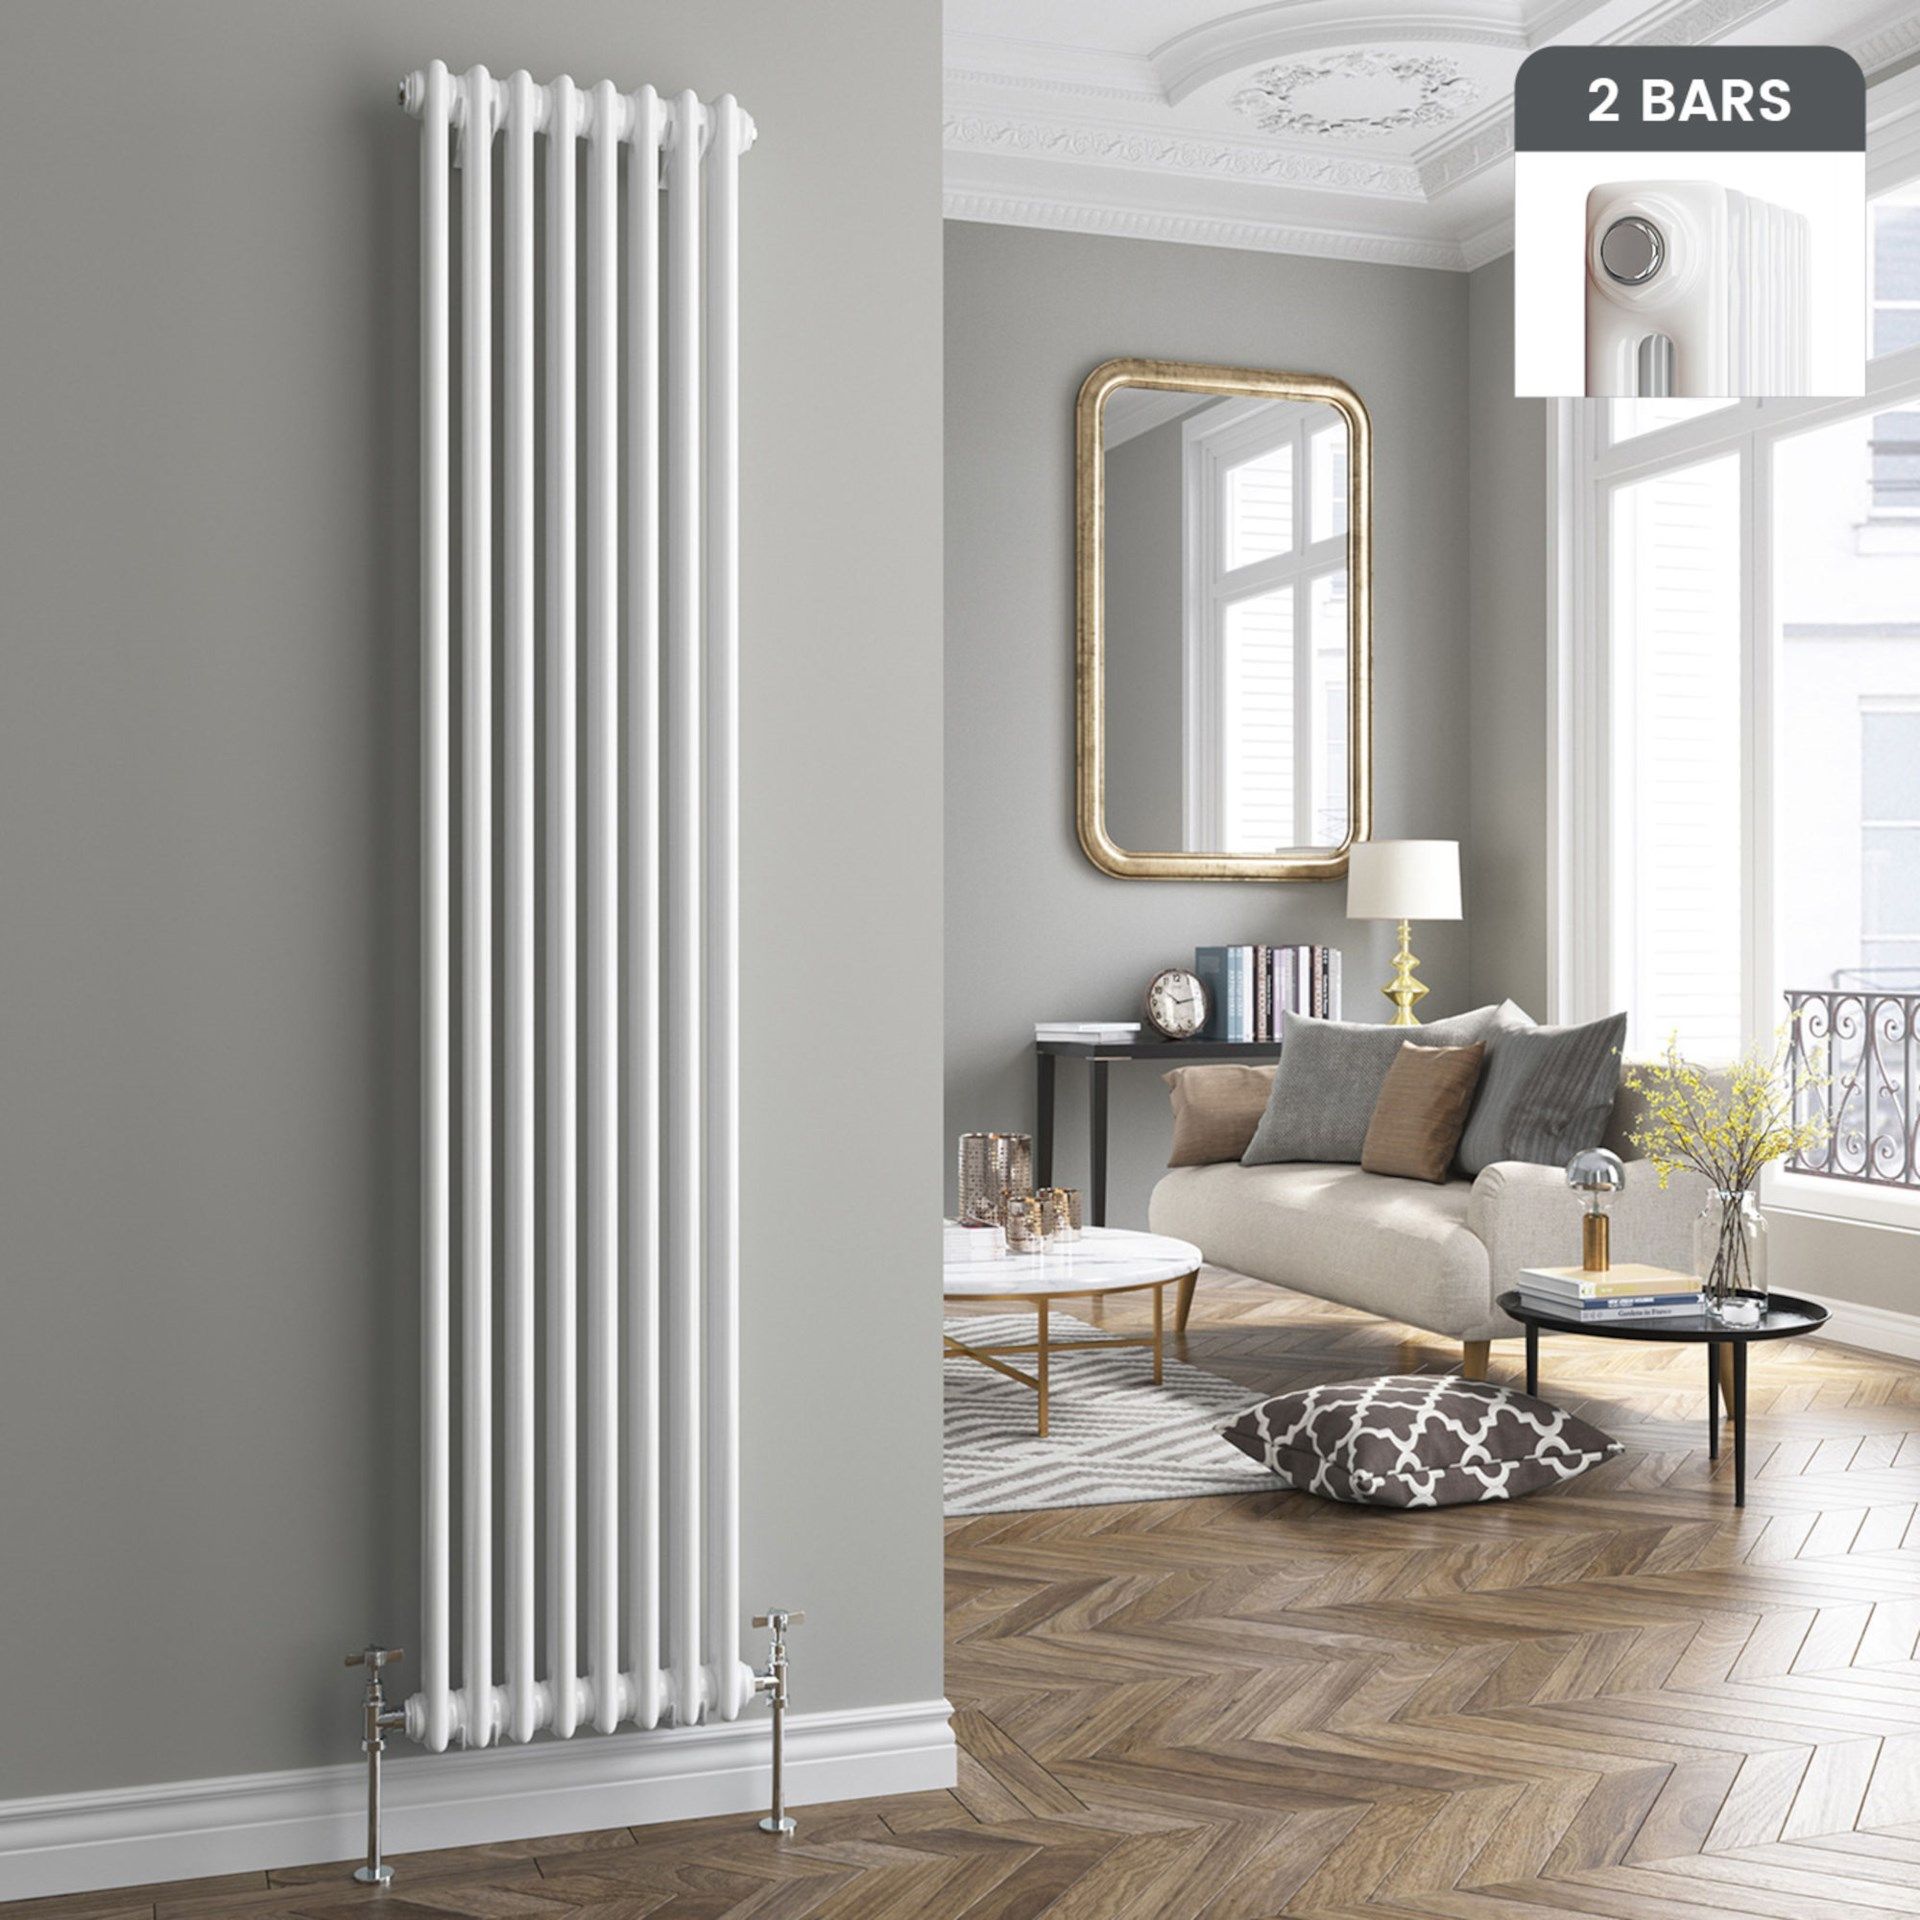 (JL83) 2000x490mm White Double Panel Vertical Colosseum Traditional Radiator. RRP £528.99.   (